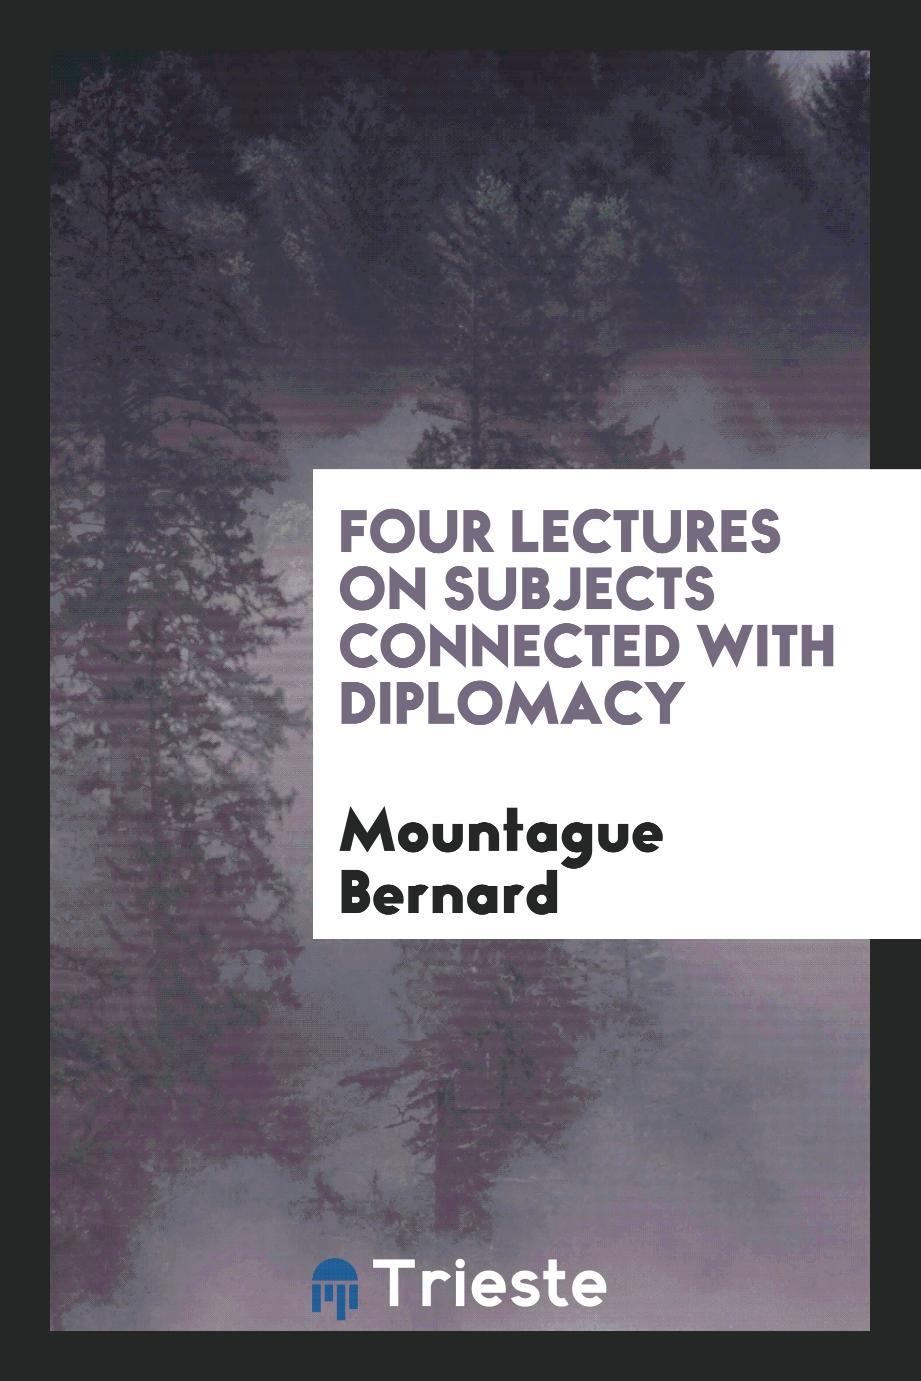 Mountague Bernard - Four Lectures on Subjects Connected with Diplomacy